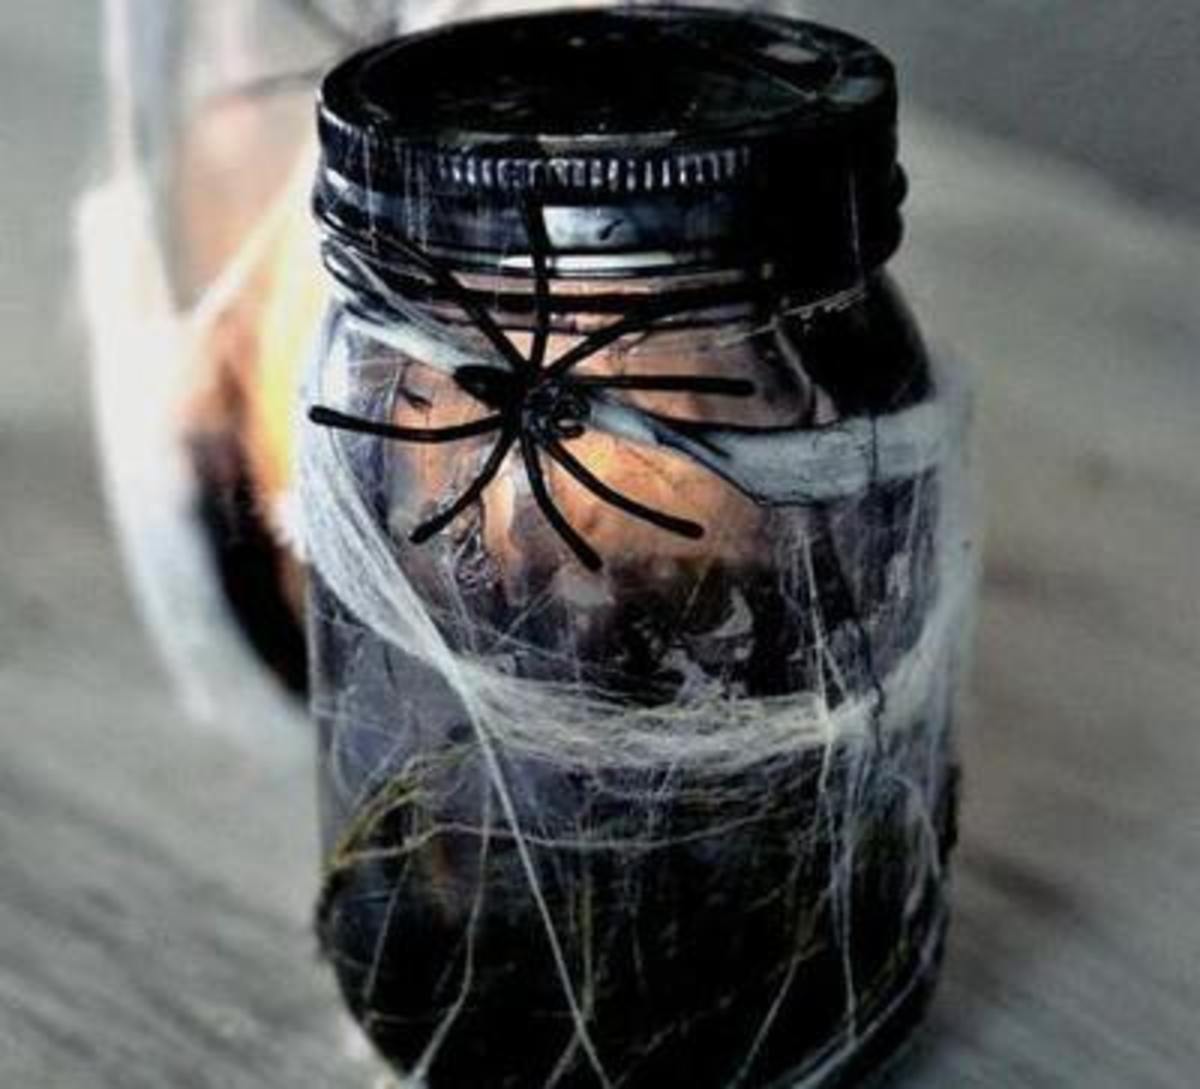 You could make these jars as luminaries or simply scary, spider-covered decorations.